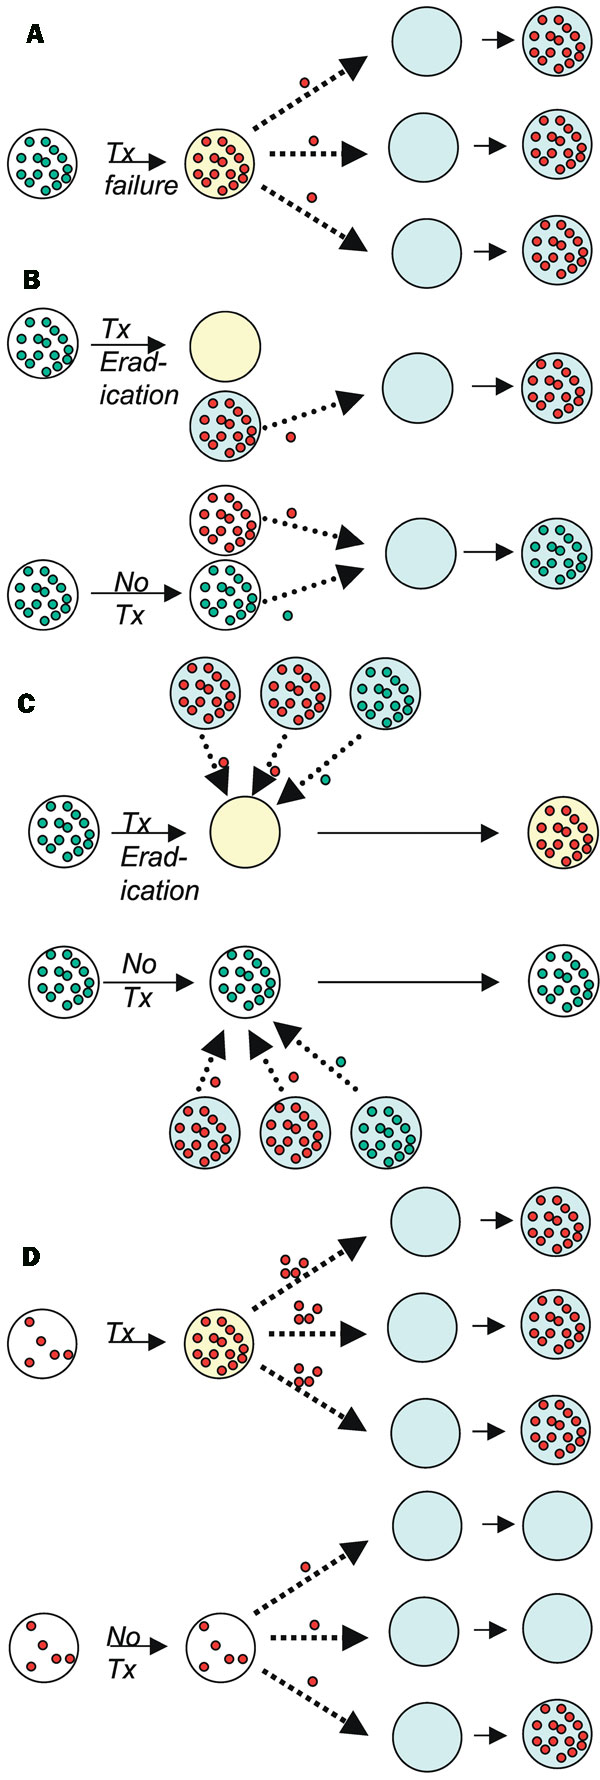 Four mechanisms by which antibiotic treatment can create selection for resistance in the population, showing direct effects—increased resistance in treated (yellow) vs. untreated (white) hosts, and indirect effects—increased resistance in others (turquoise) due to treatment of specific hosts. (A) Subpopulations (usually mutants) of resistant (red) bacteria are present in a host infected with a predominantly susceptible (green) strain; treatment fails, resulting in outgrowth of the resistant subp